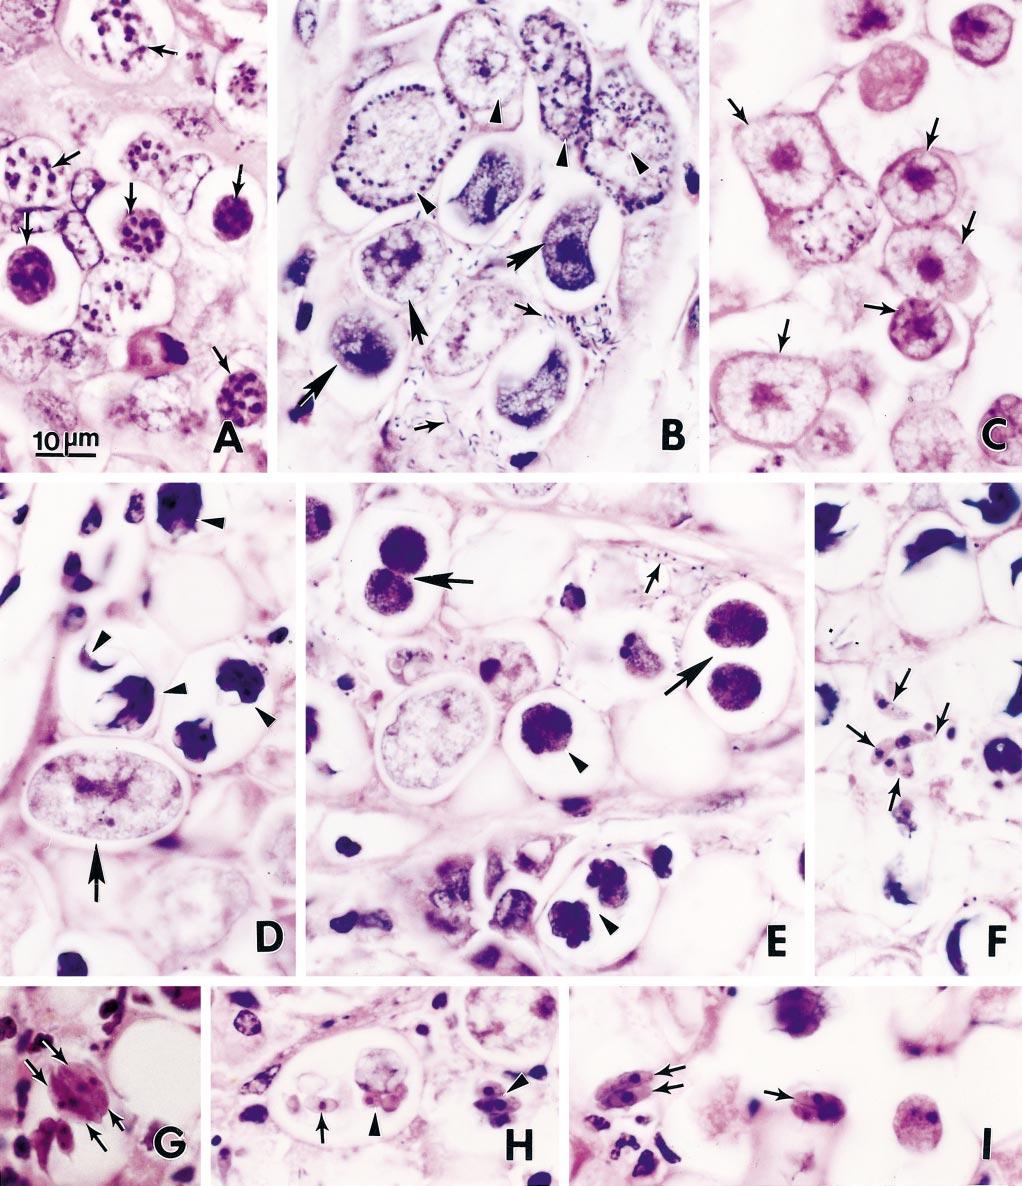 550 THE JOURNAL OF PARASITOLOGY, VOL. 88, NO. 3, JUNE 2002 FIGURE 2. Coccidian stages in sections of colon of camels. Hematoxylin and eosin stain. Bar applies to all figures.